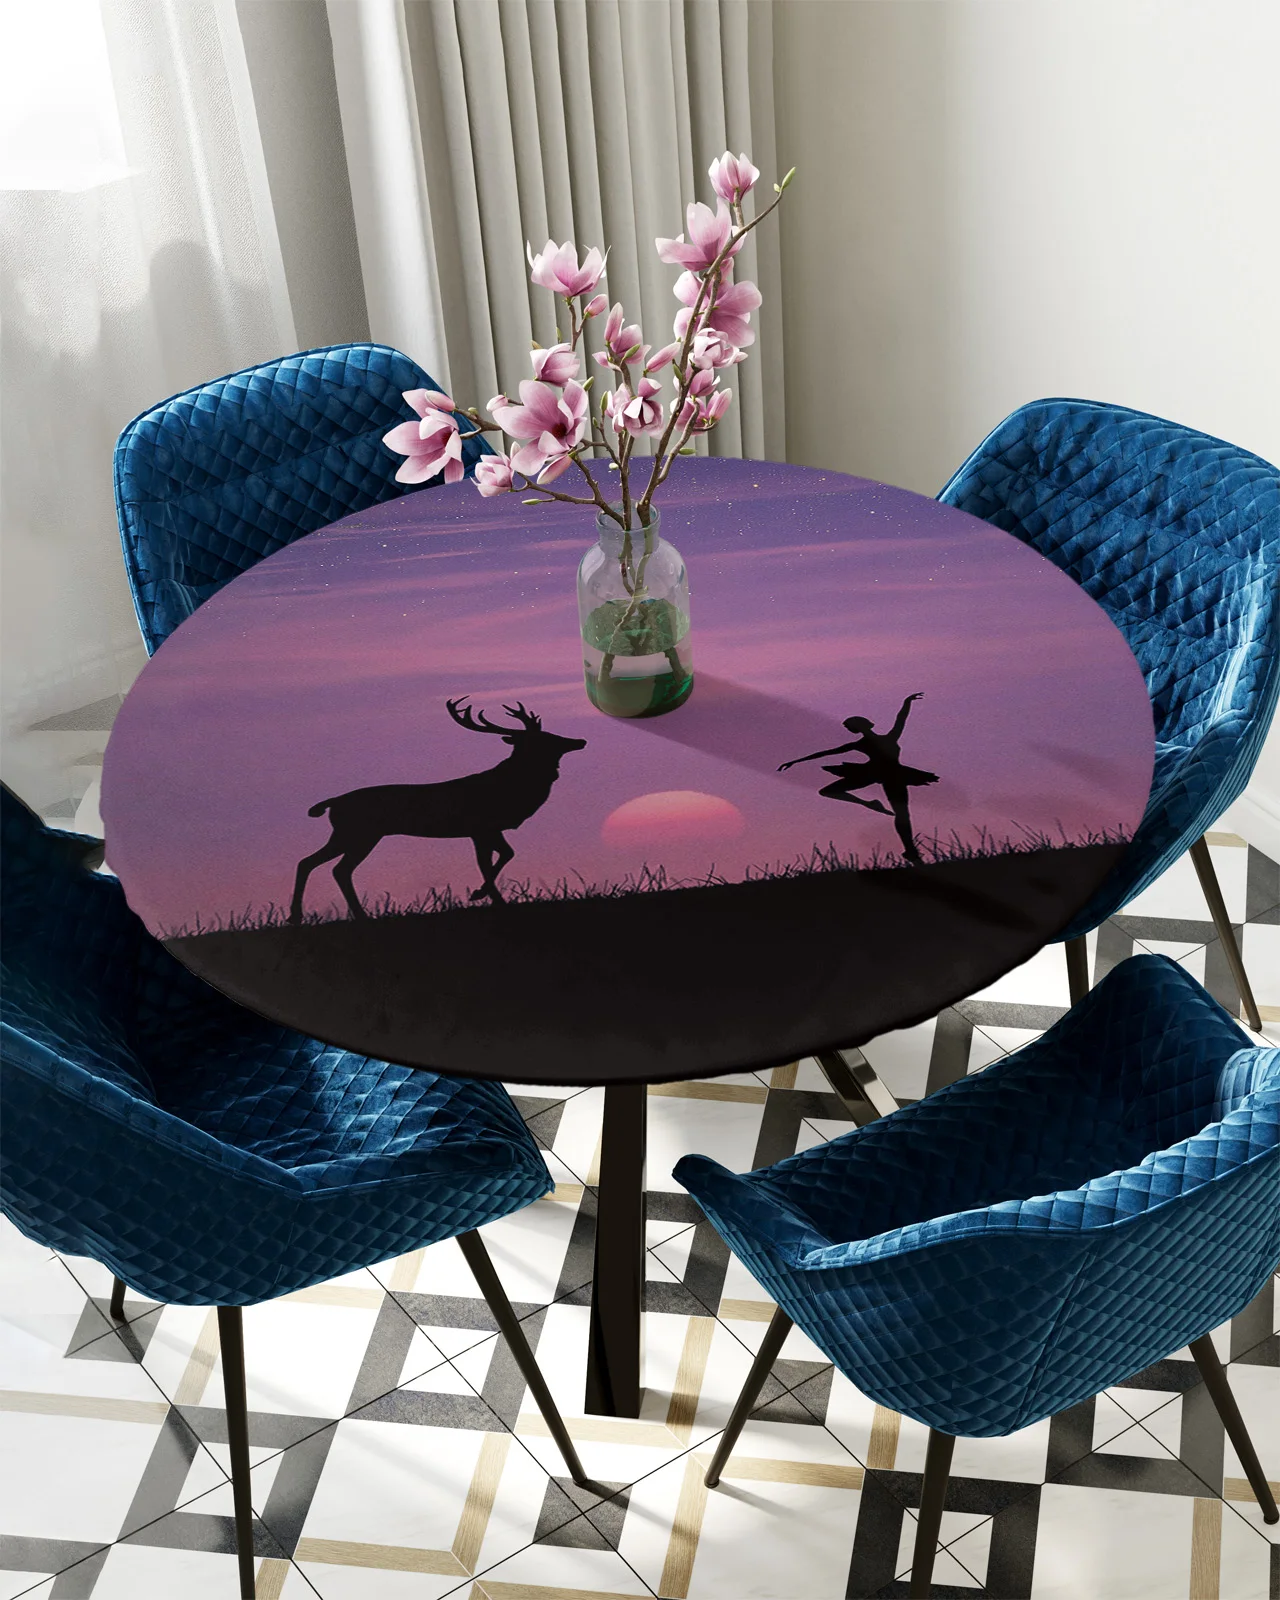 

Grassland Deer Girls Dance In The Starry Sky Round Tablecloth Waterproof Elastic Tablecloth Home Kitchen Dining Room Table Cover